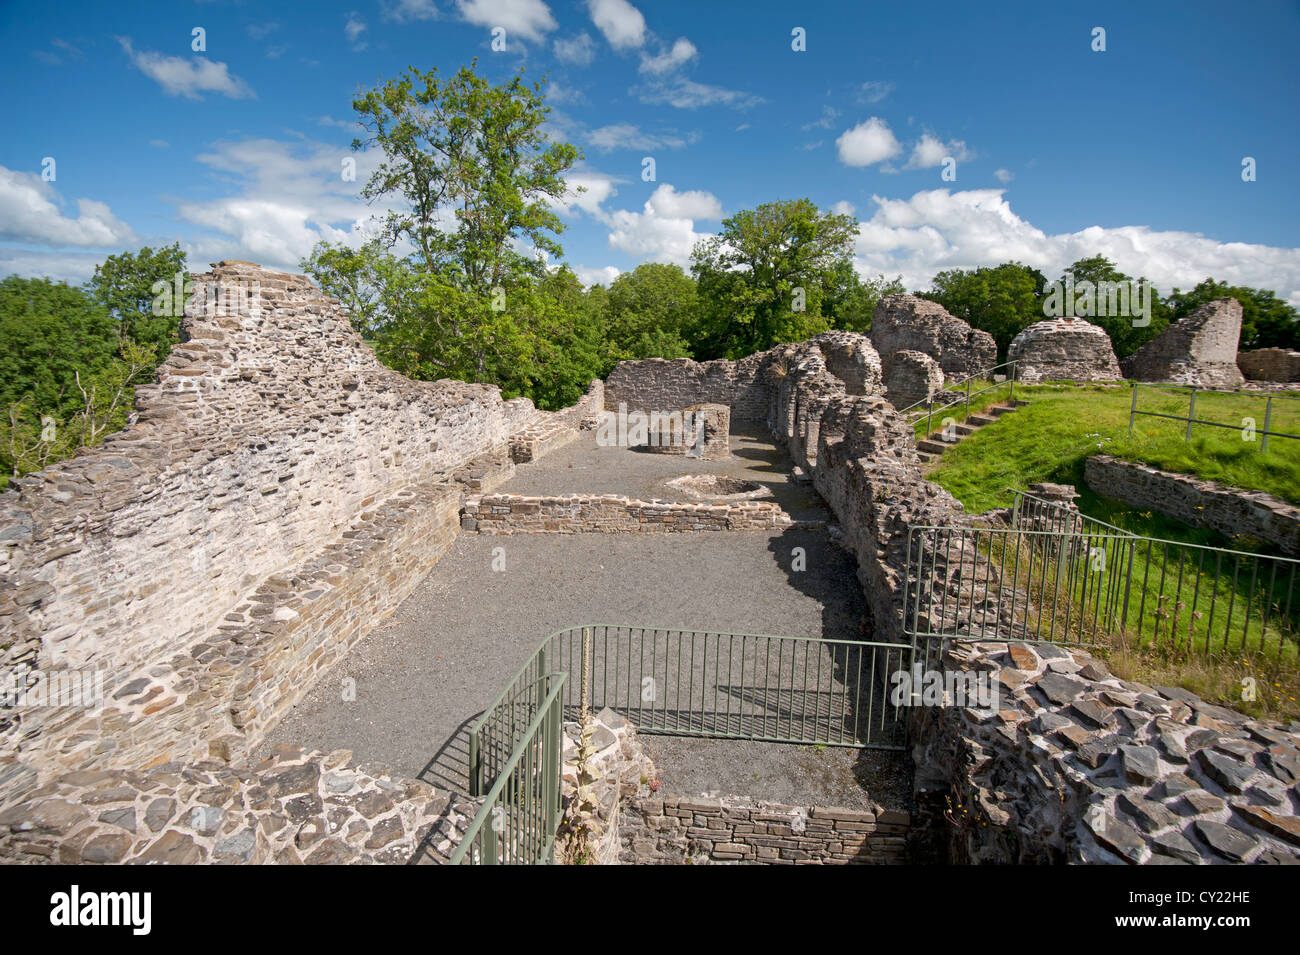 Dolforwyn Castle, recently excavated ruins in Powys, Montgomeryshire. Mid Wales.  SCO 8703 Stock Photo